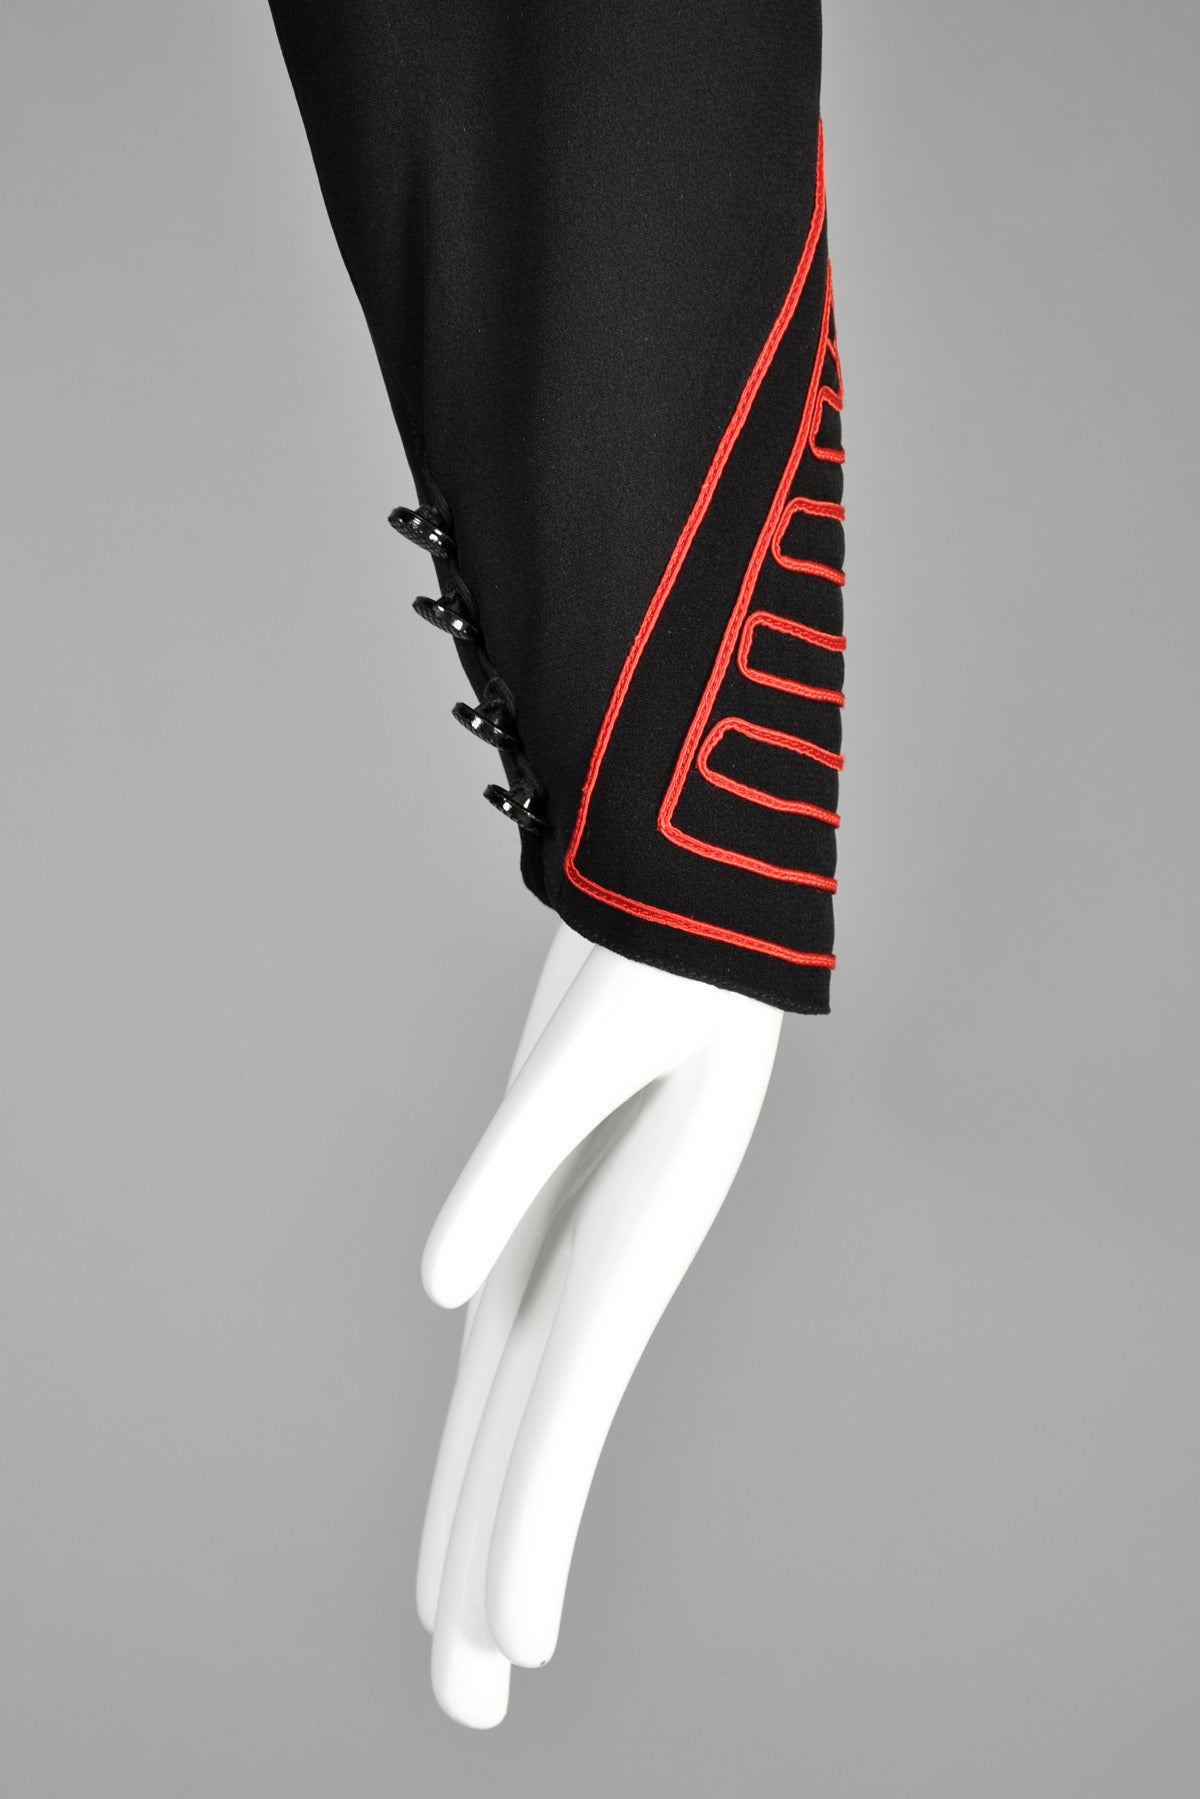 Karl Lagerfeld for Chloe 1980's Embroidered Dress 3